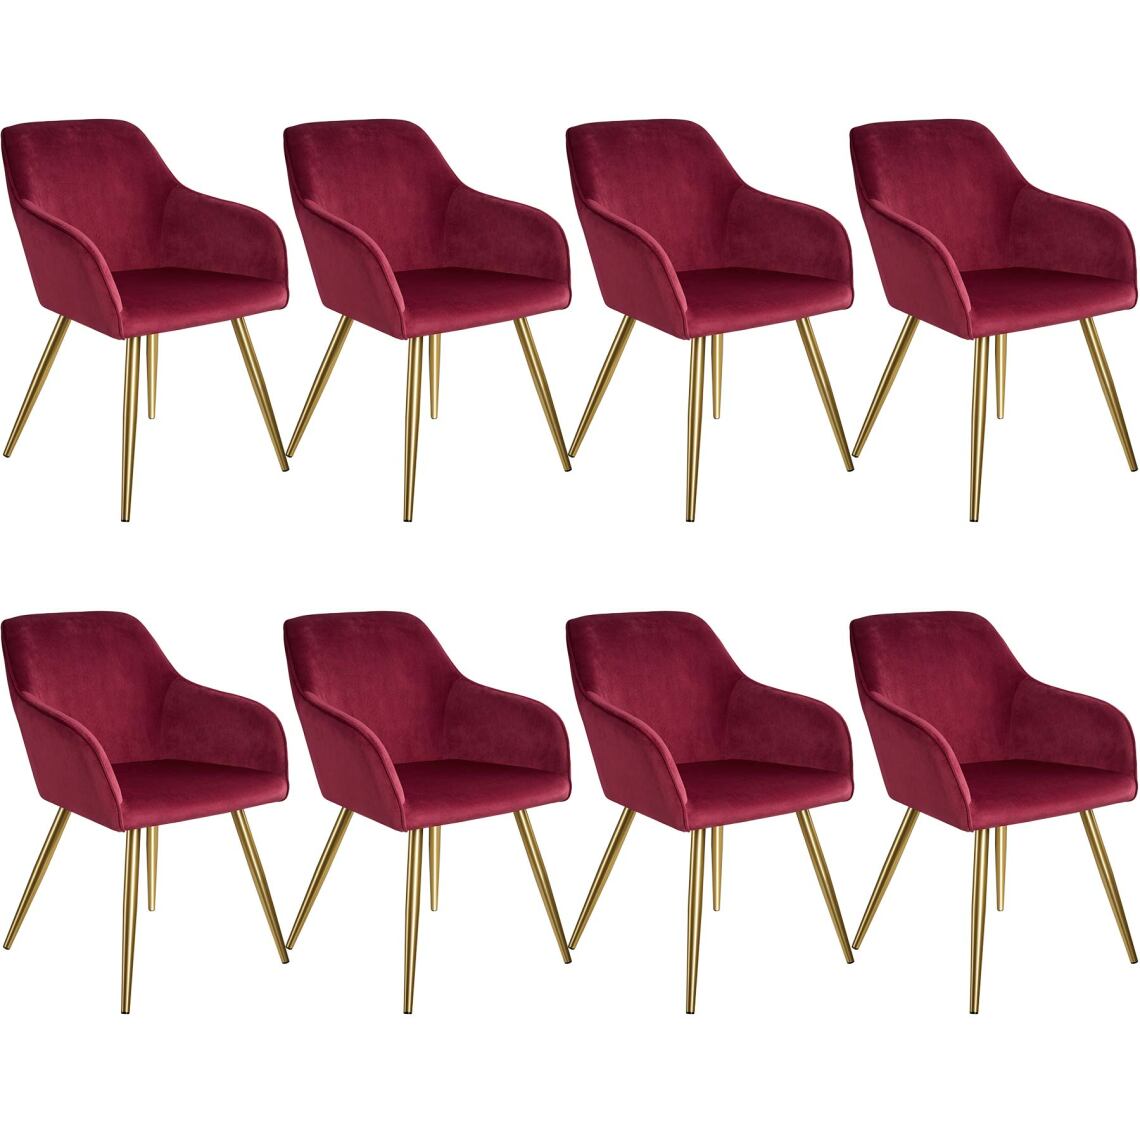 Tectake - 8 Chaises MARILYN Effet Velours Style Scandinave - bordeaux/or - Chaises